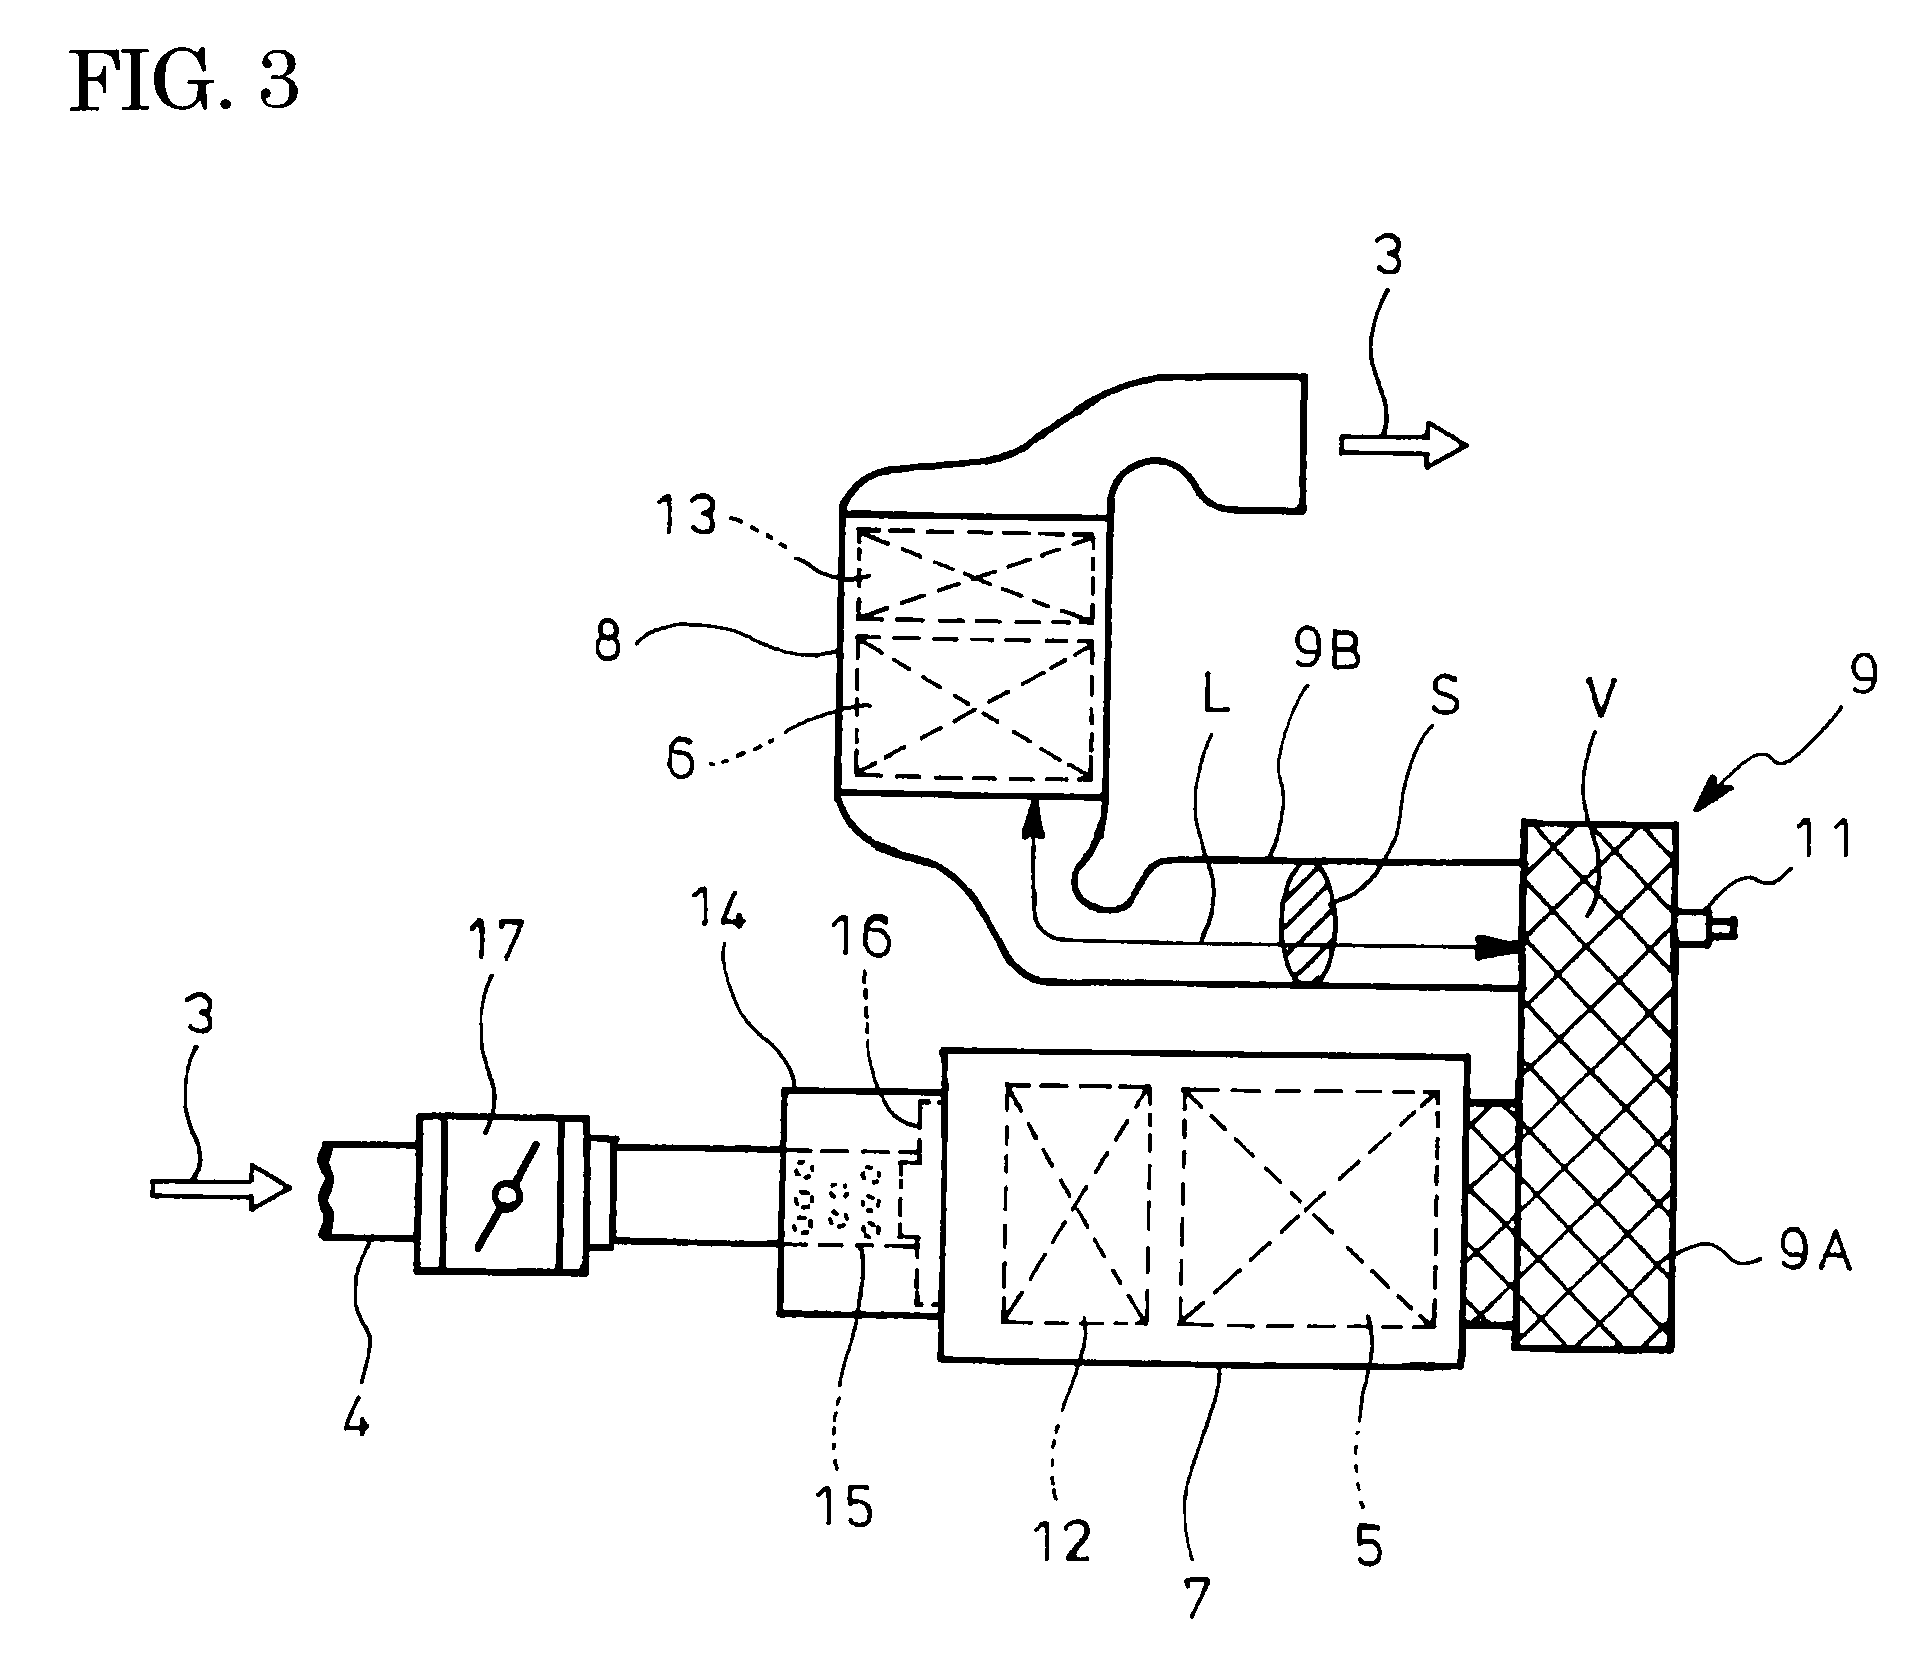 Exhaust emission control device